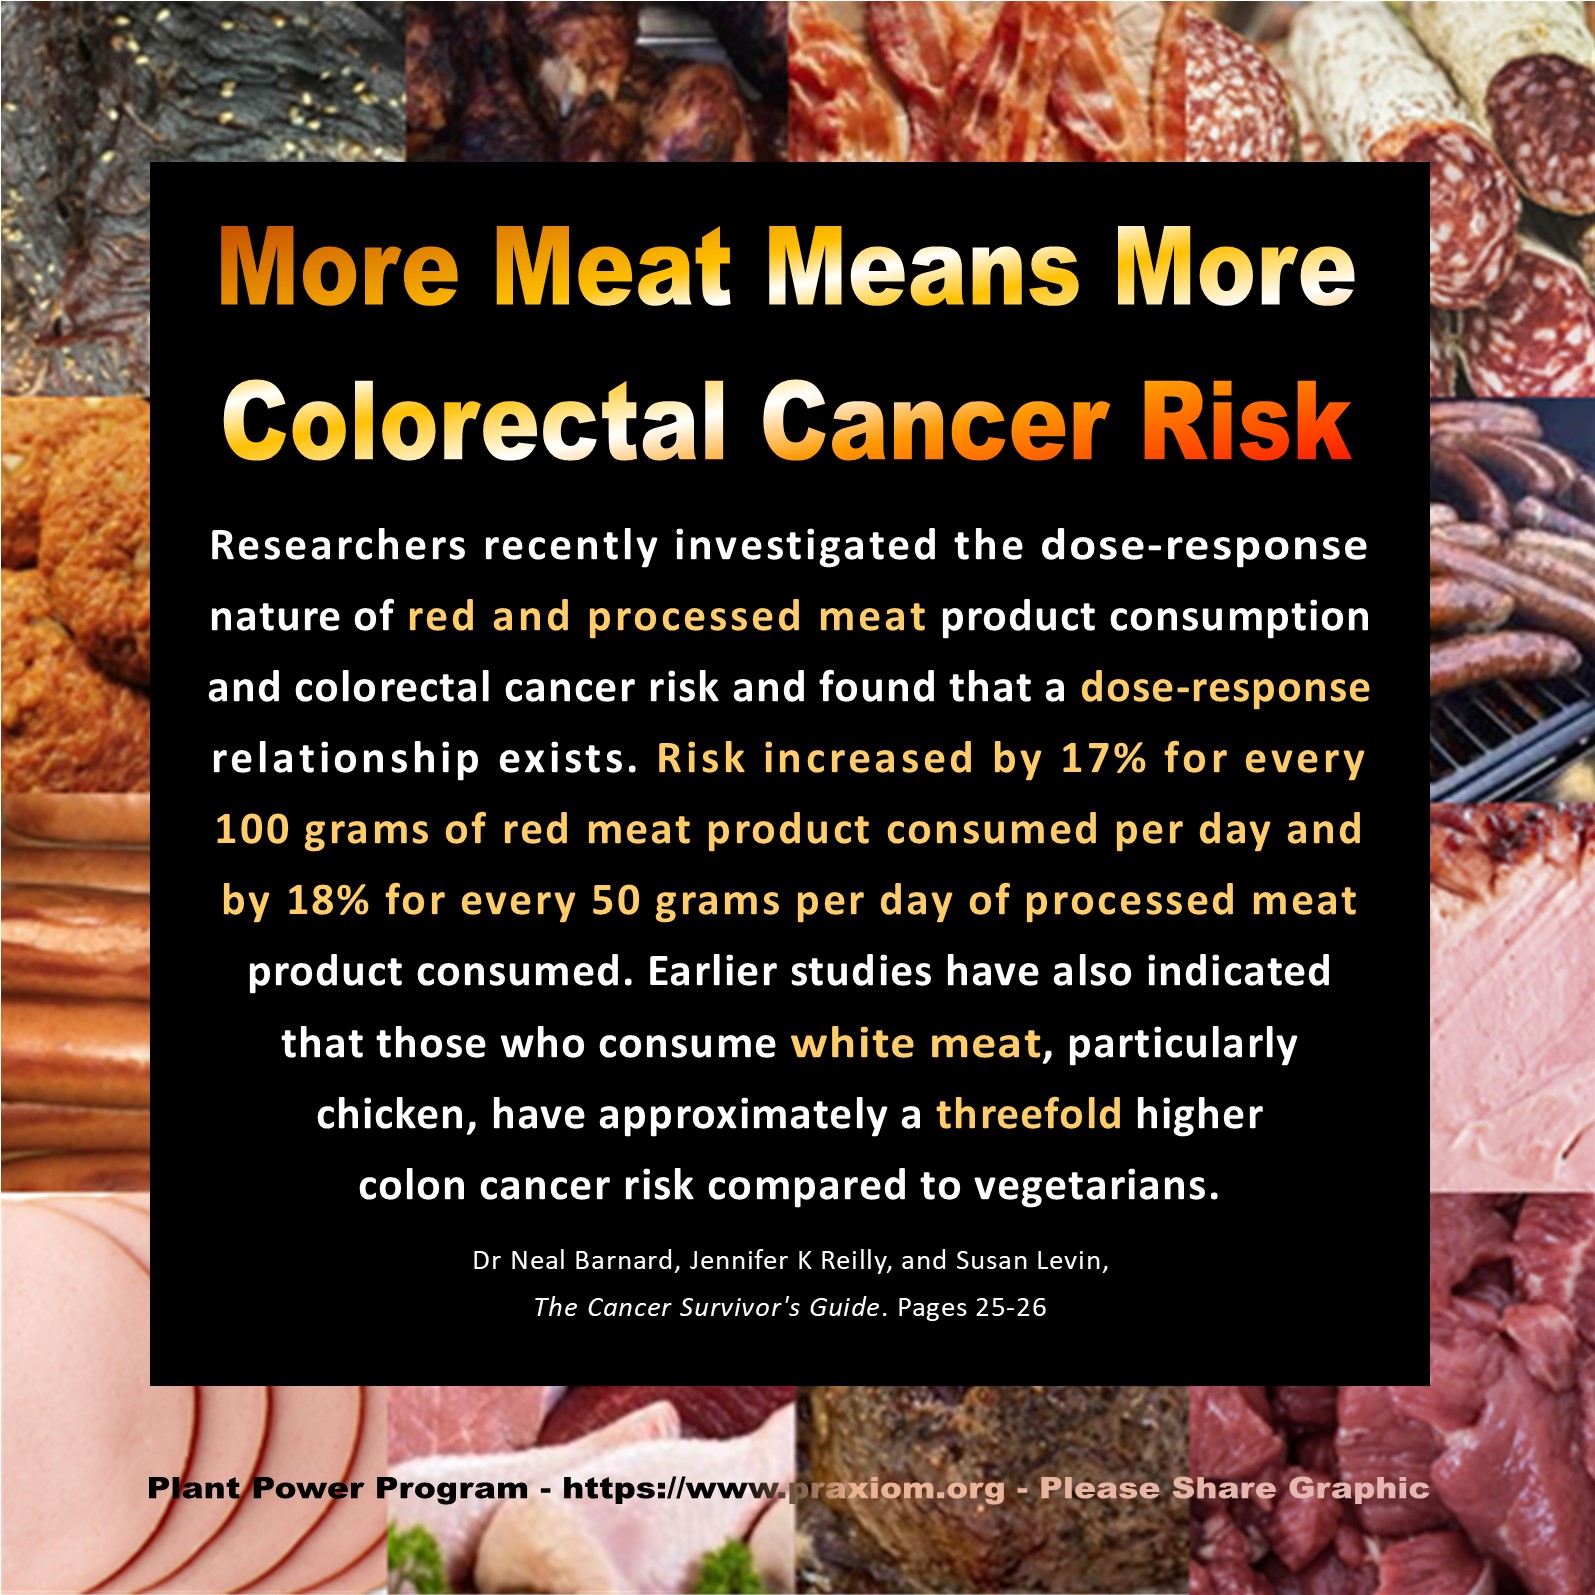 More Meat Means More Colorectal Cancer - Dr Neal Barnard